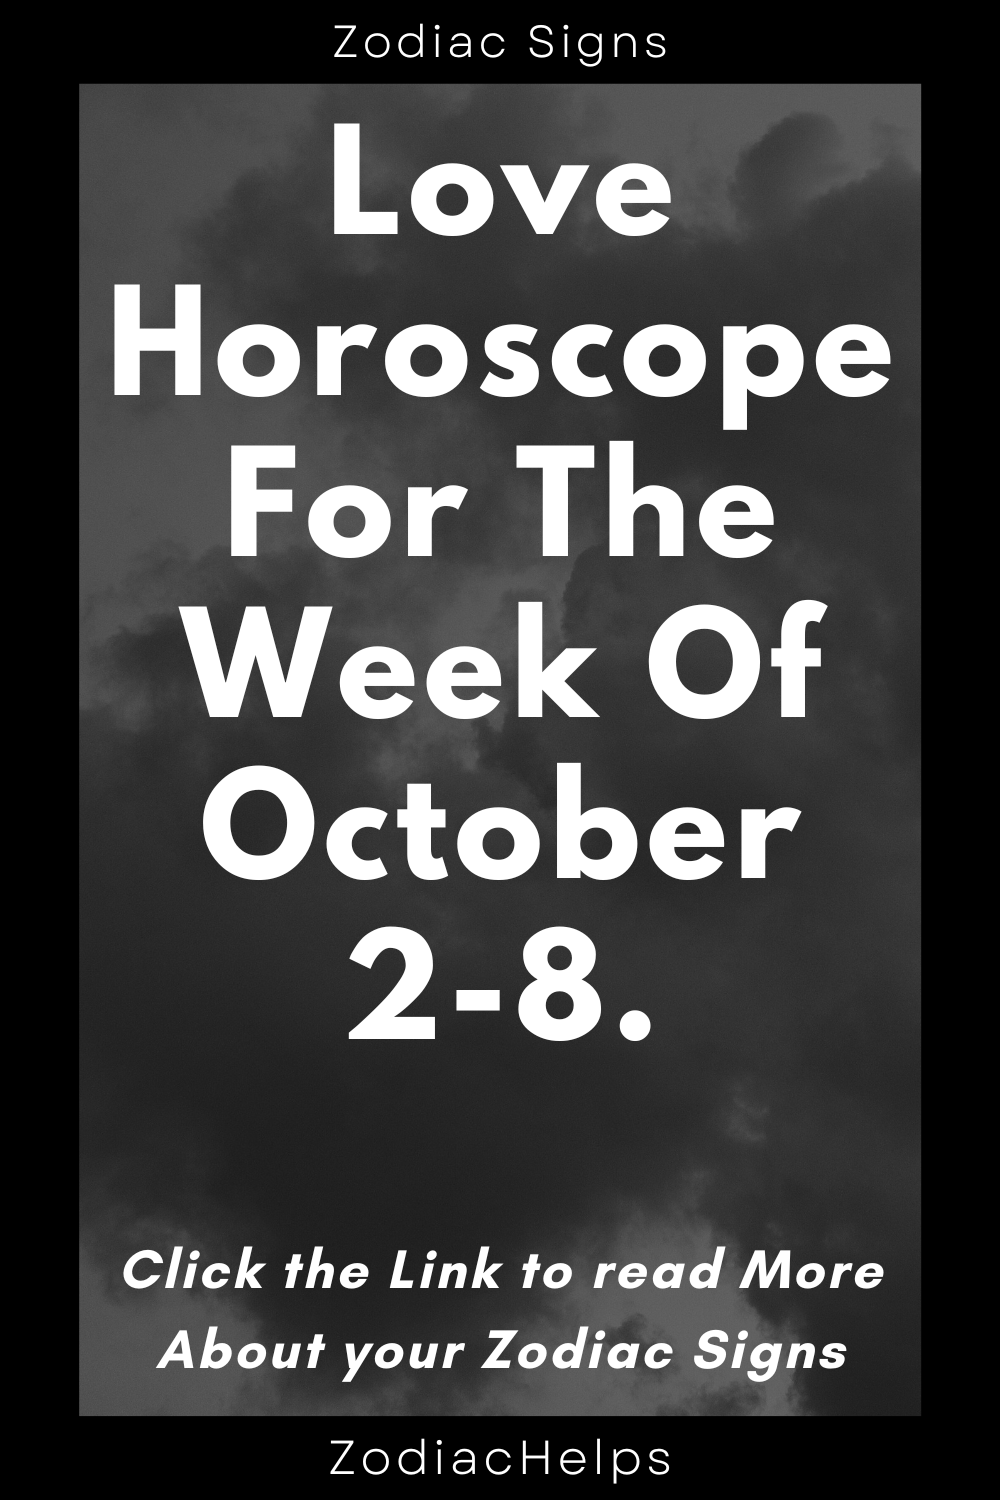 Love Horoscope For The Week Of October 2-8.